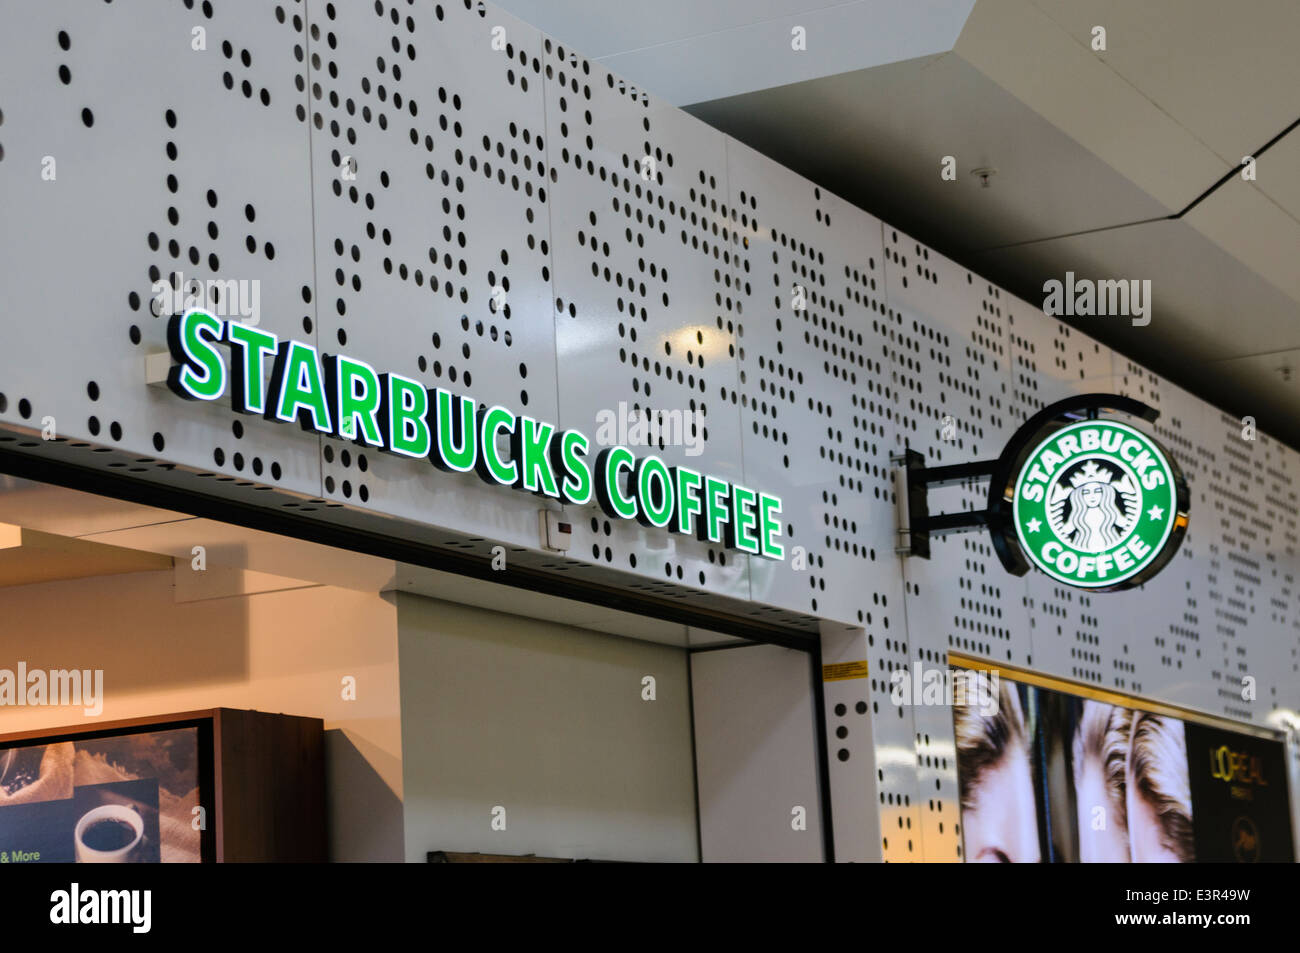 Starbucks Coffee Shop in Schiphol Airport Stock Photo